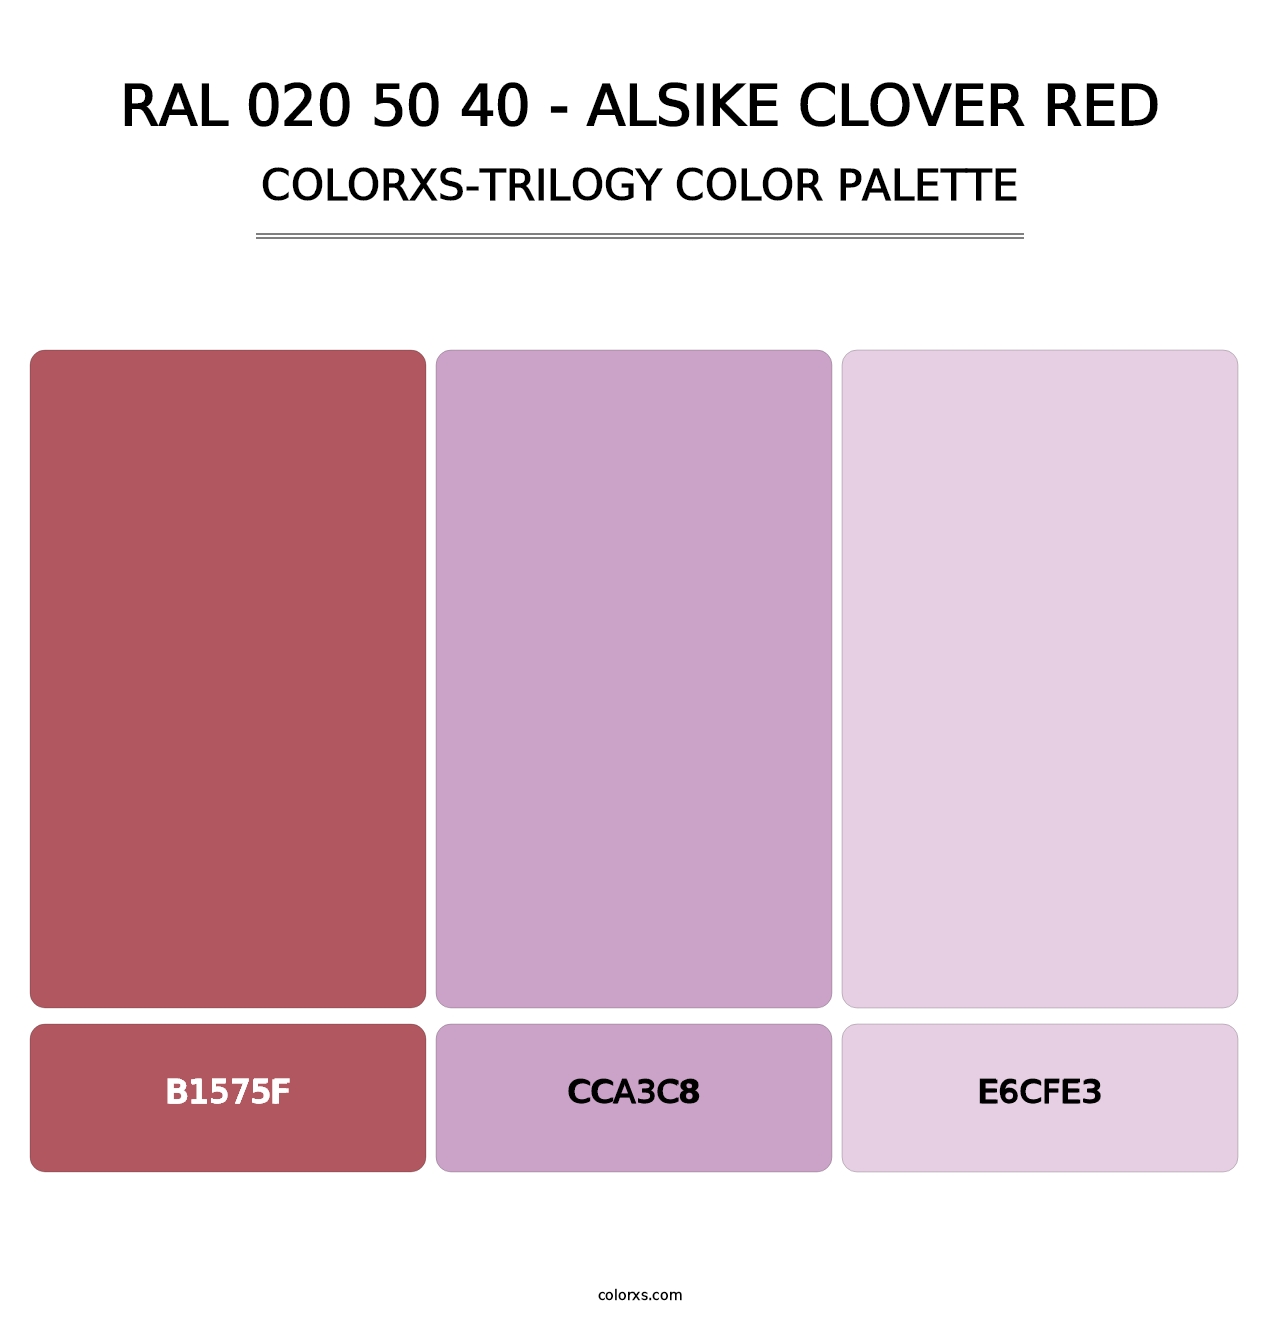 RAL 020 50 40 - Alsike Clover Red - Colorxs Trilogy Palette